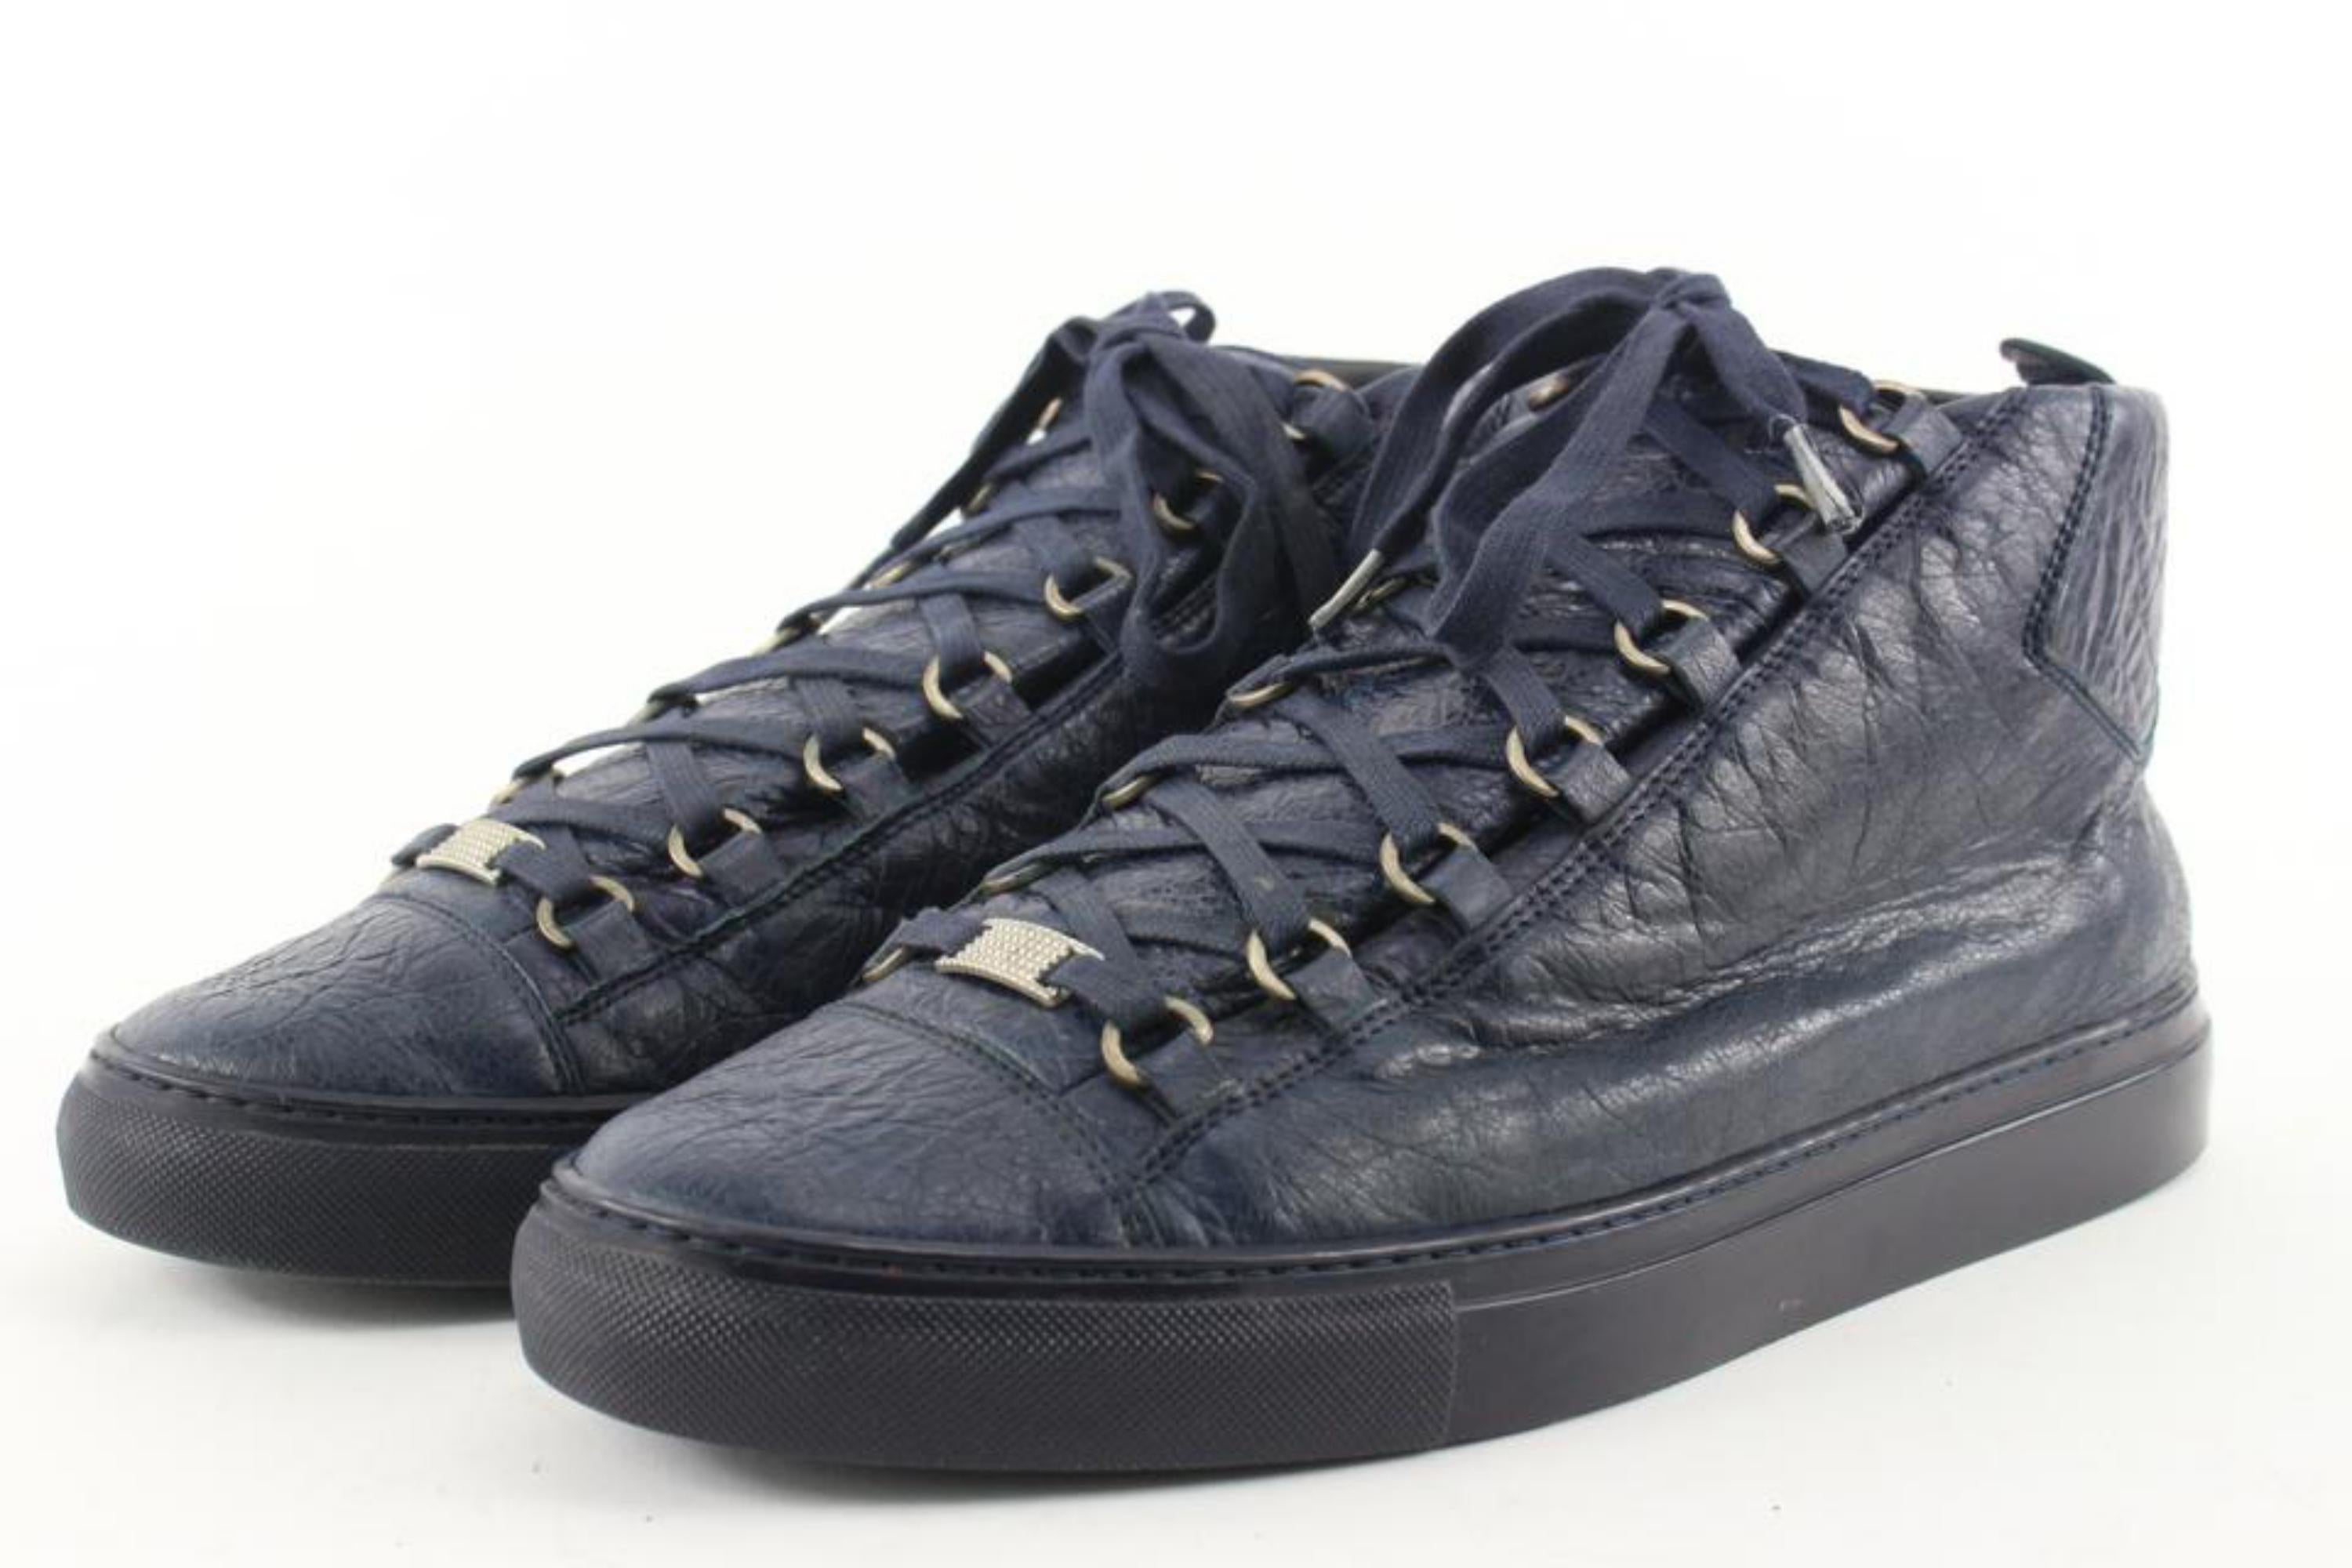 Balenciaga Men's 44 Navy Leather Arena Sneakers 7BA113
Date Code/Serial Number: 341760
Made In: Spain
Measurements: Length: 12 